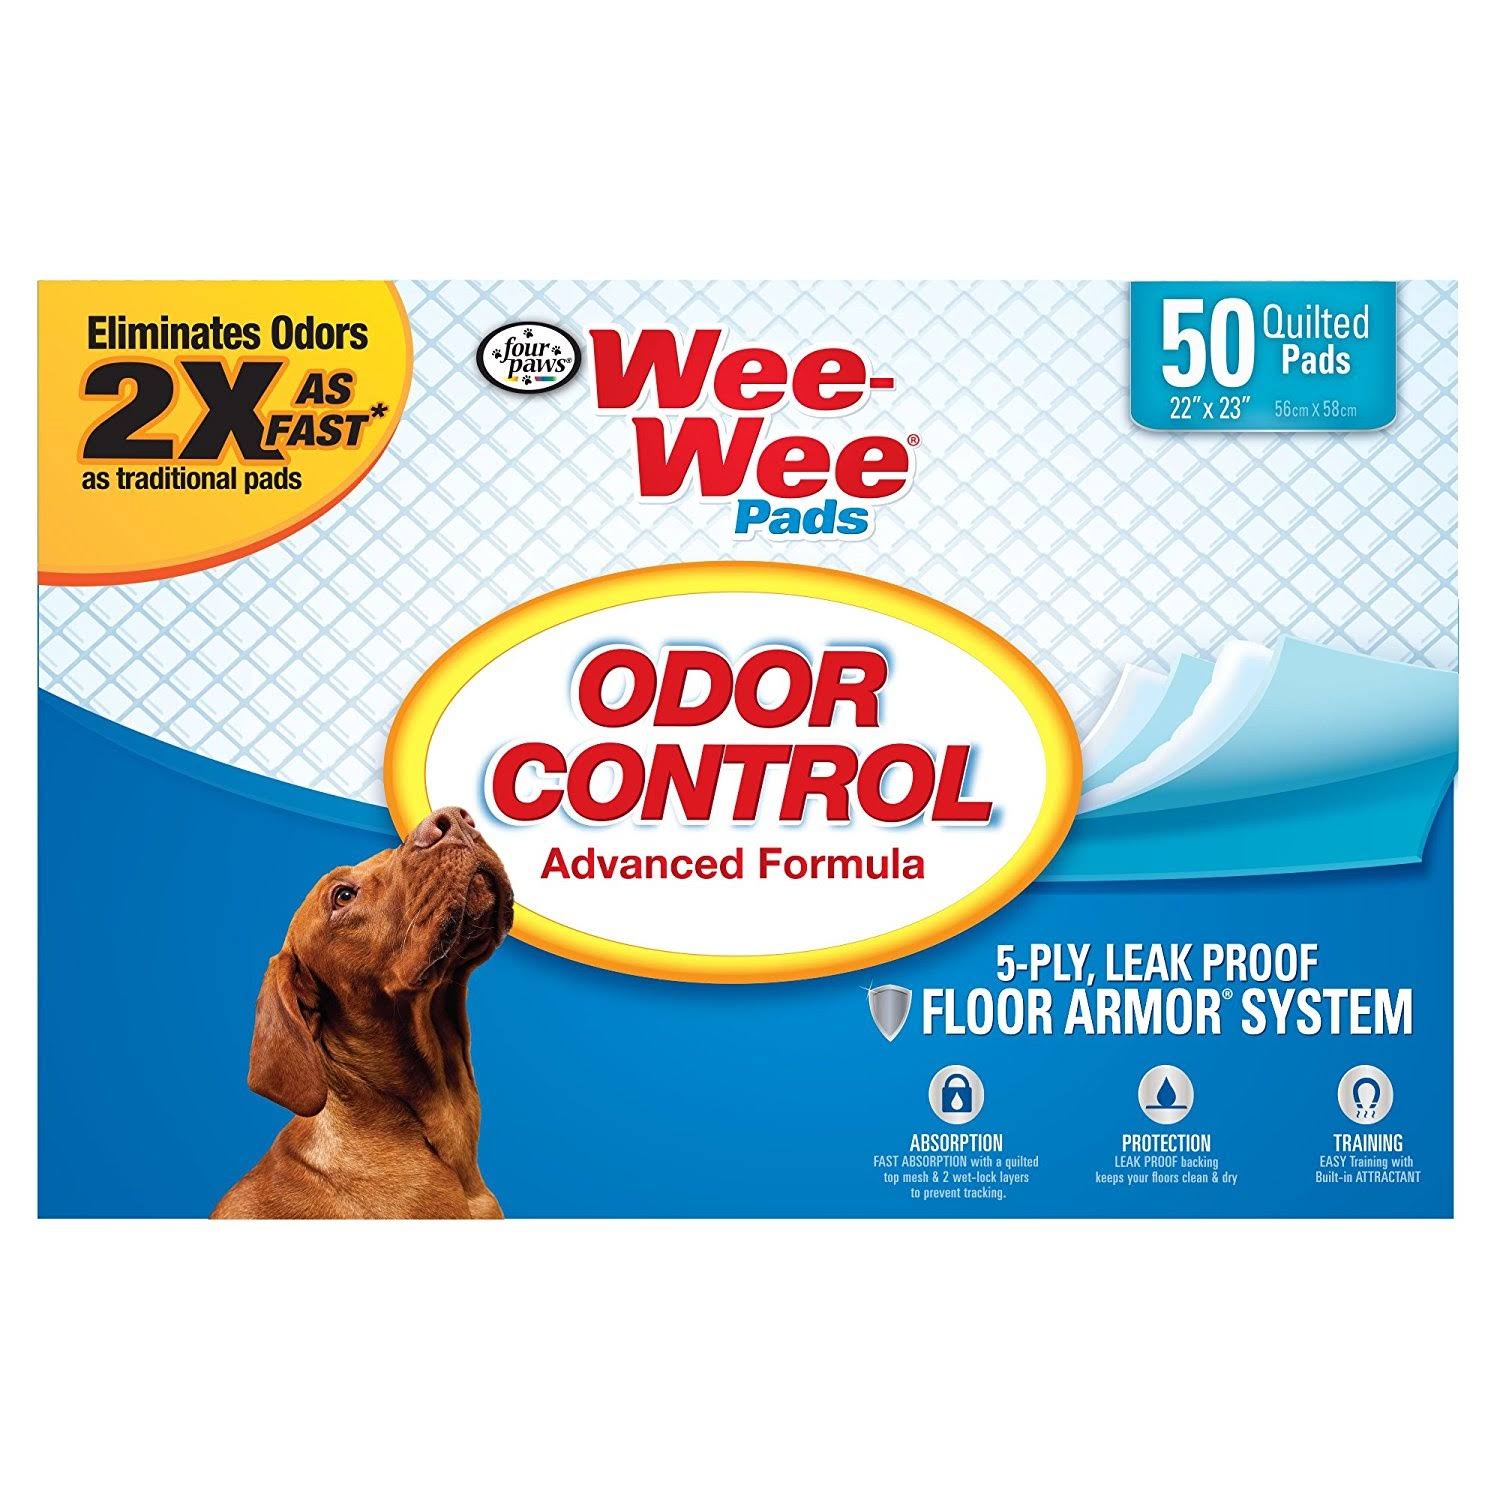 Four Paws Wee-Wee Odor Control Puppy Pads - 50 Pack